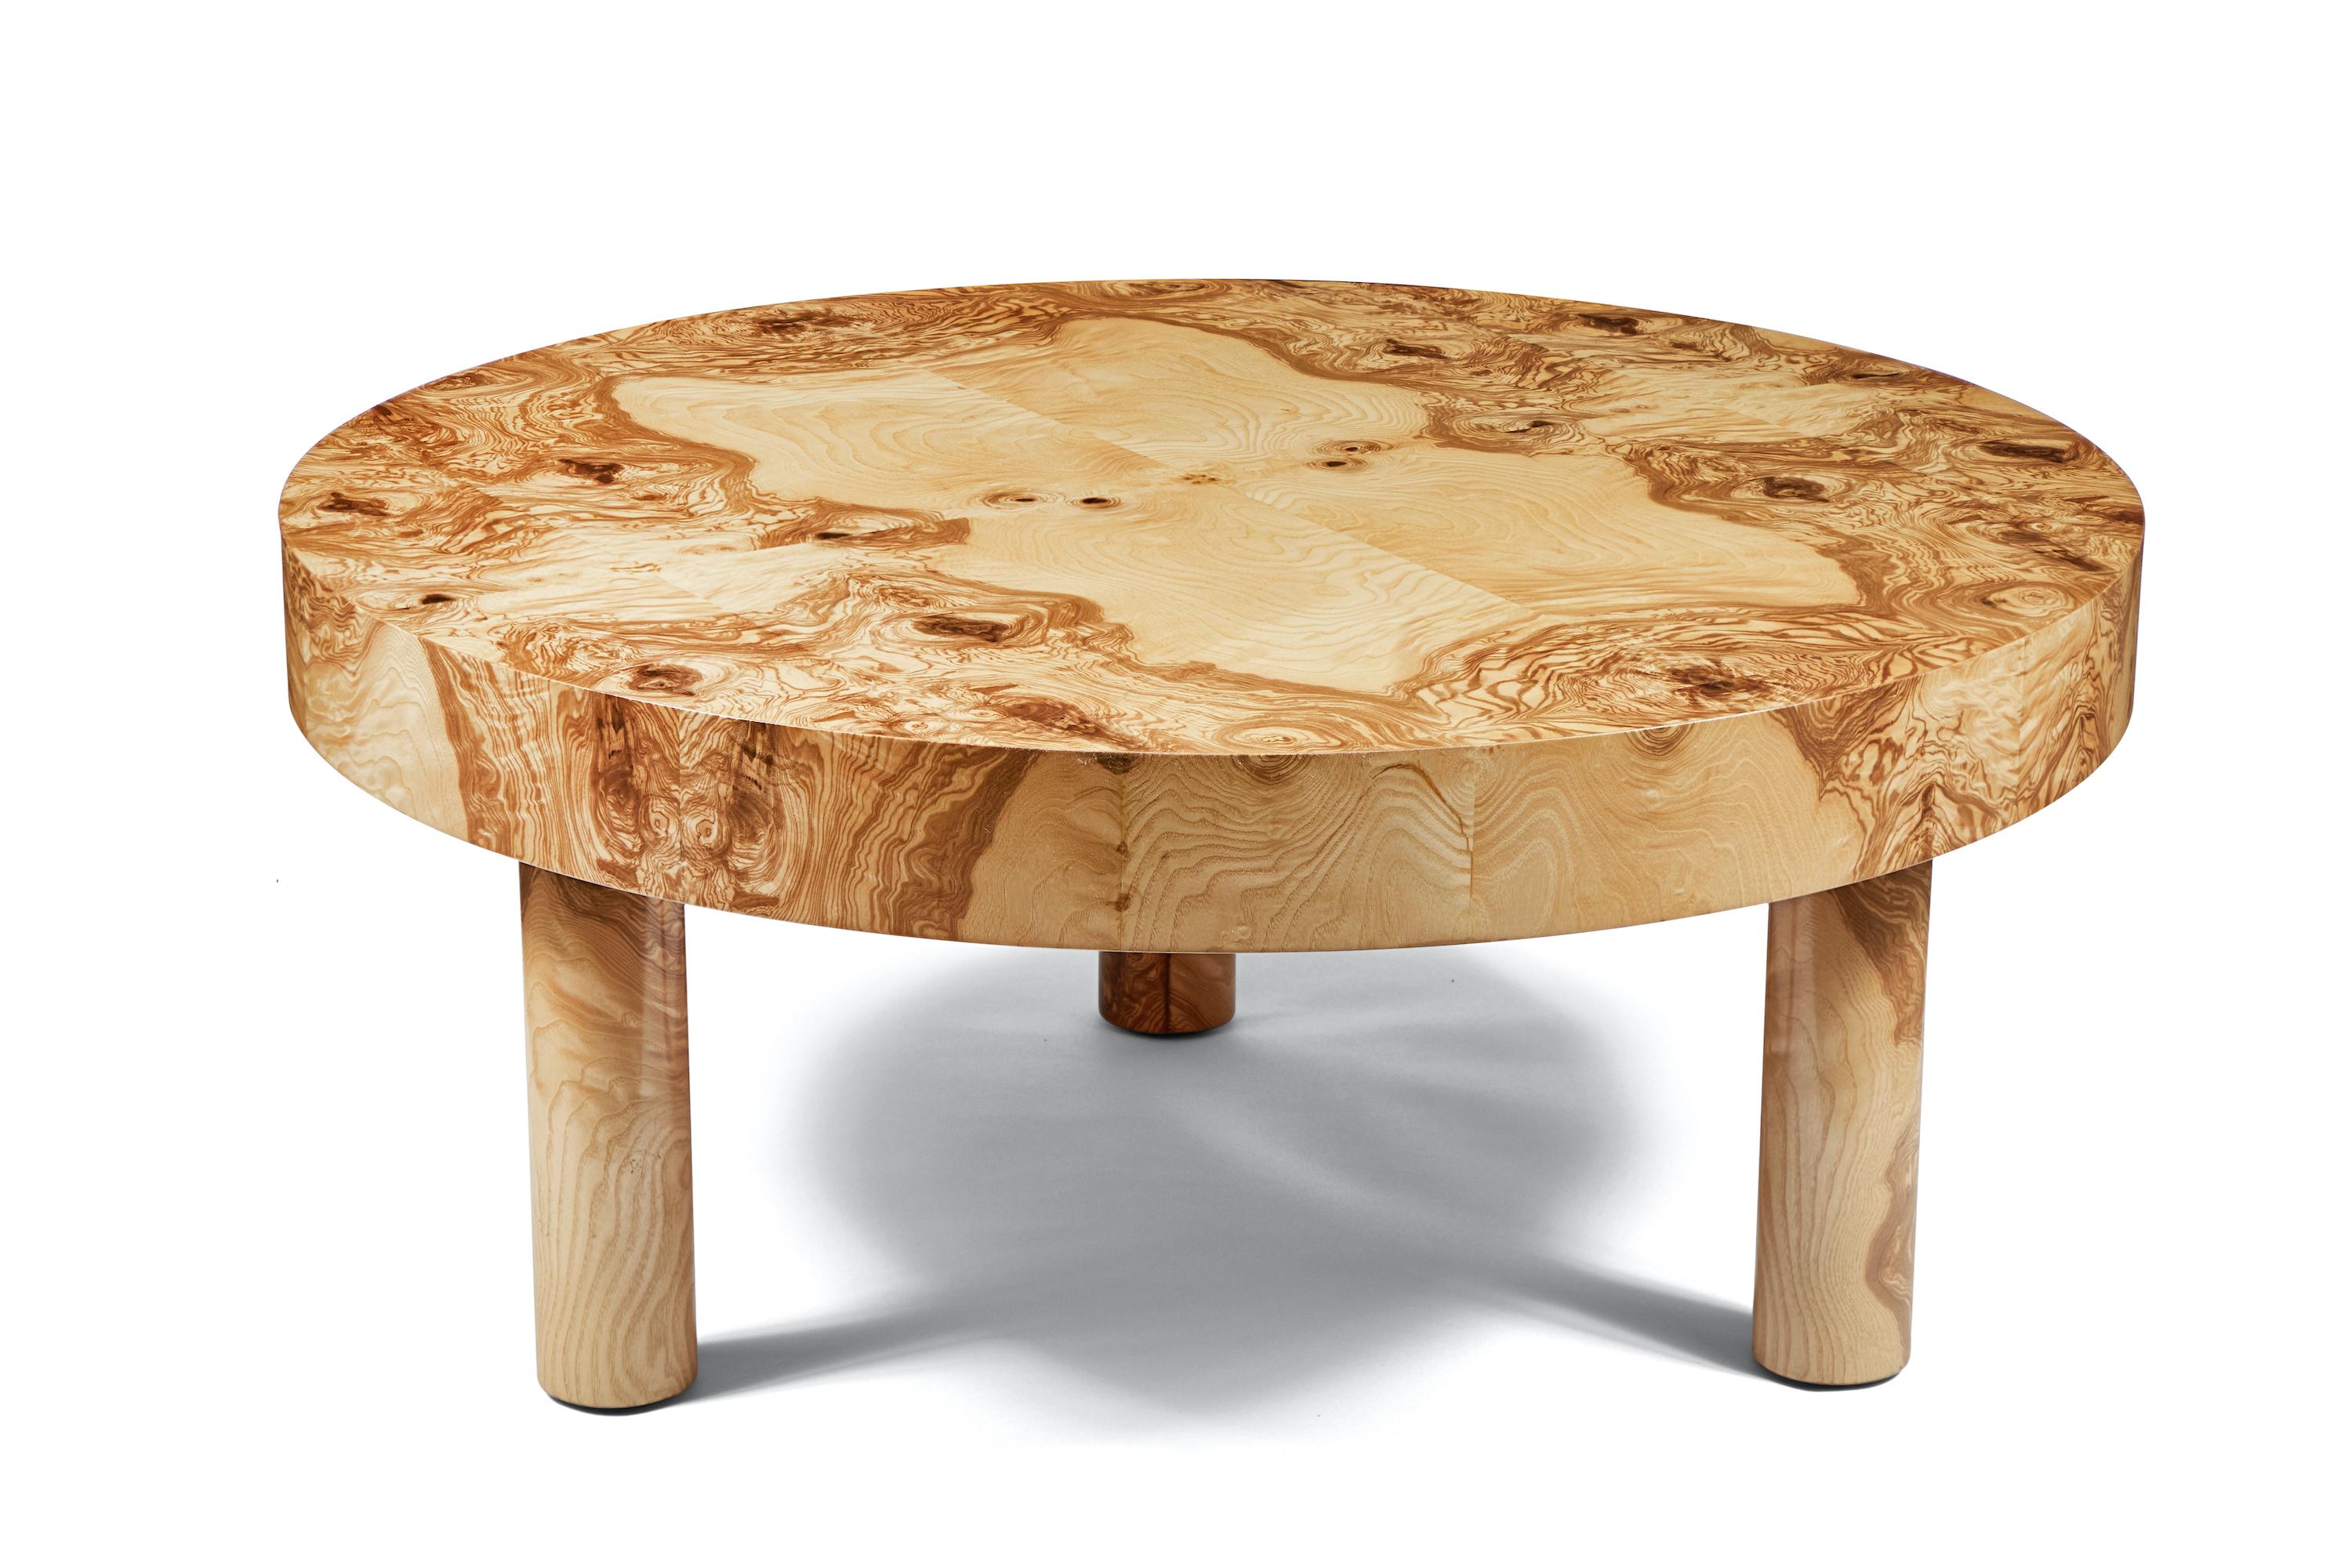 Figural woods and casual, clean lines combine in our Carlton Table, shown here in our Natural Burl Wood finish. 

Dimensions: 16